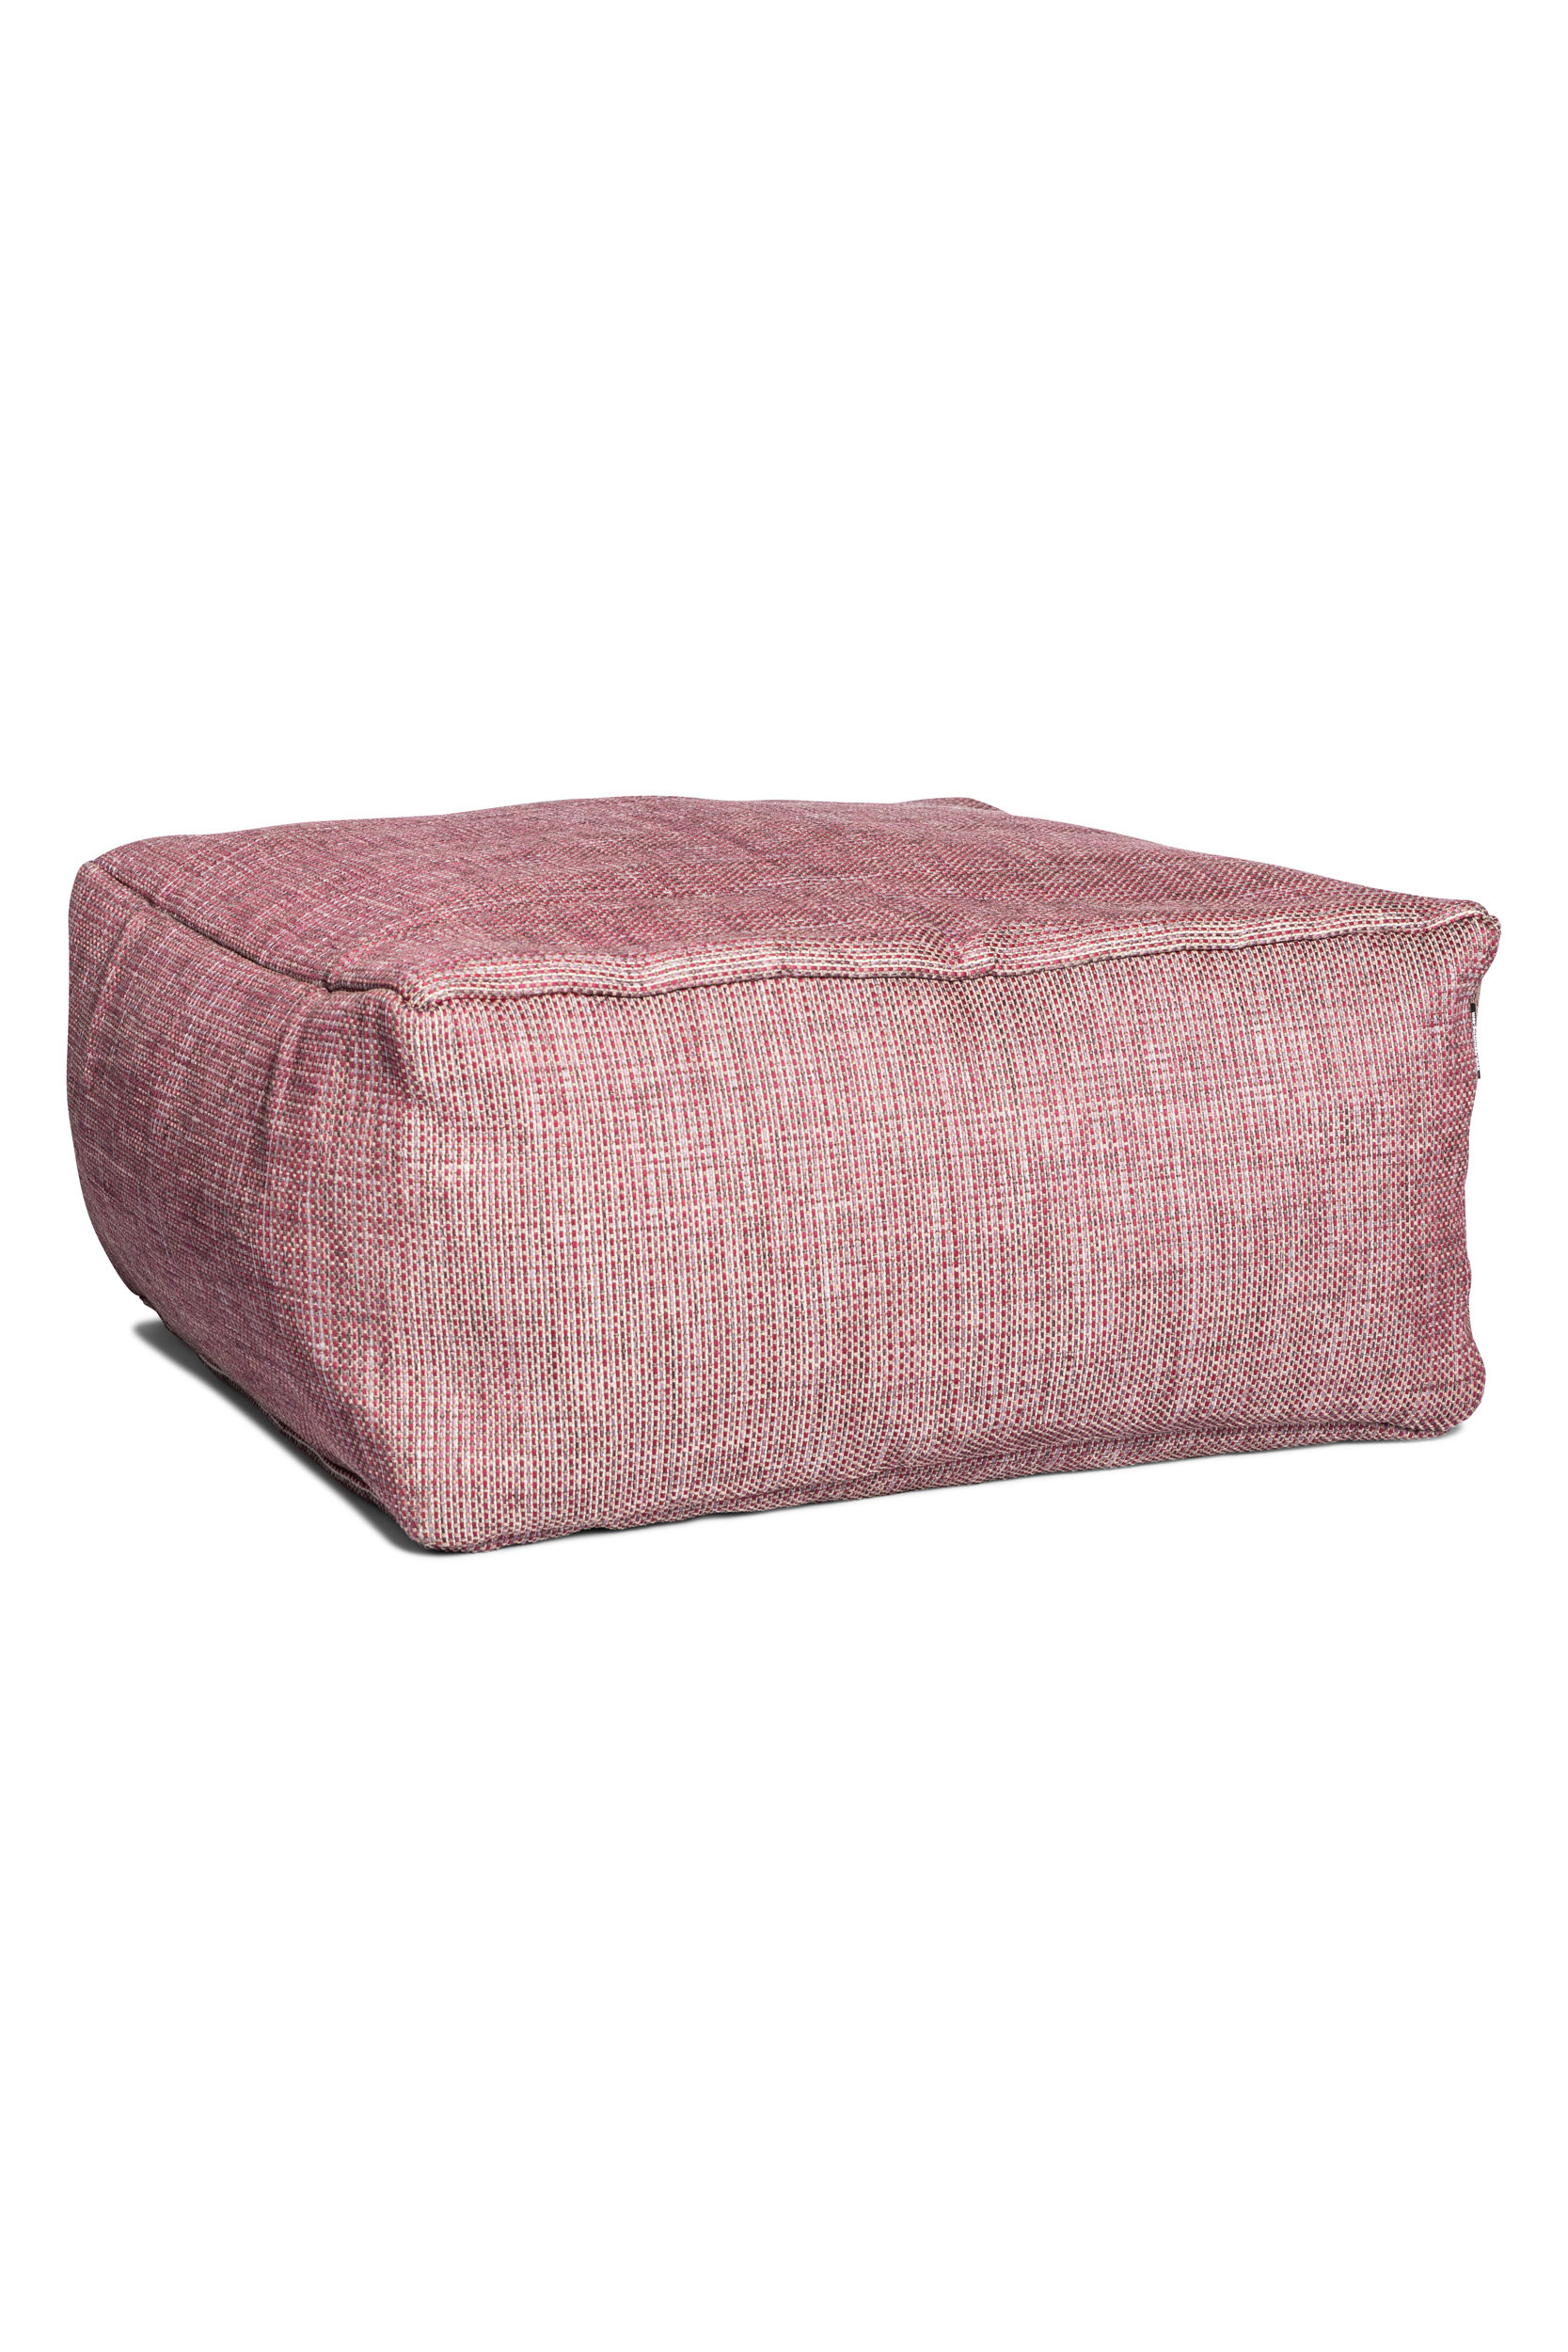 Roolf Outdoor Living Dotty Pouf Small Raspberry Side